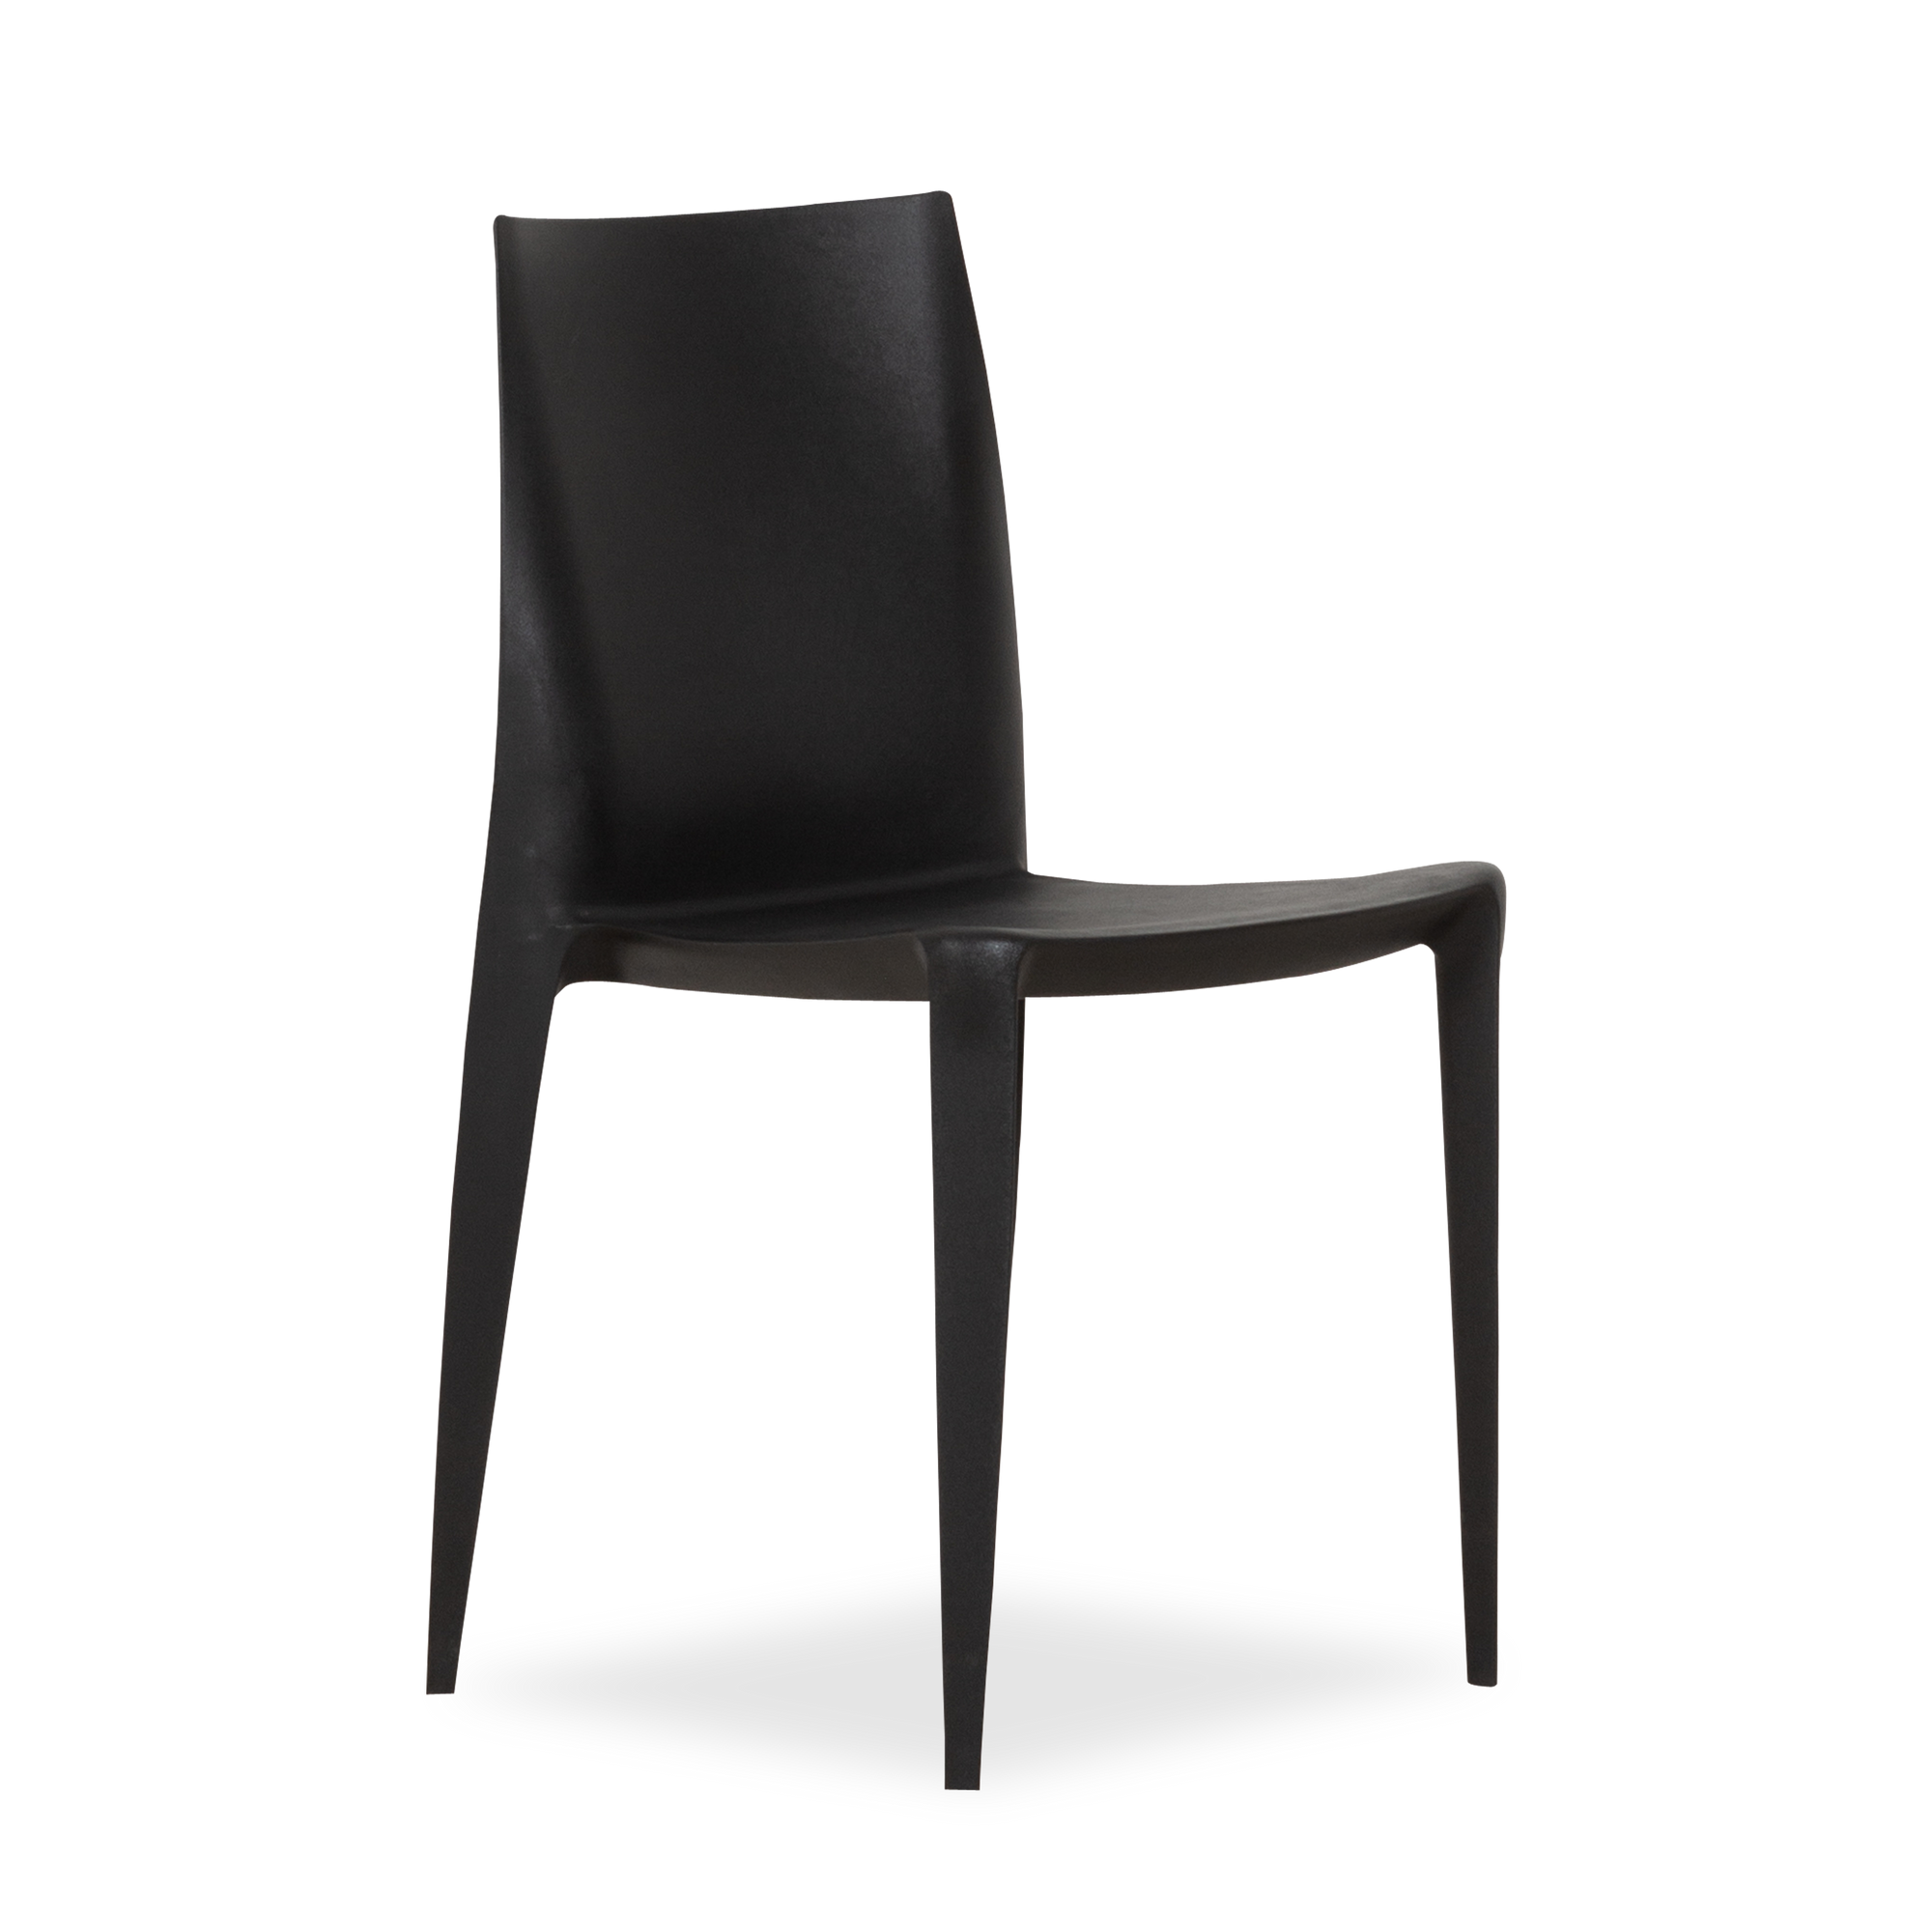 Designed by the famous Italian architect and designer Mario Bellini, the Bellini Chair is an award-winning design renown for its pure form.